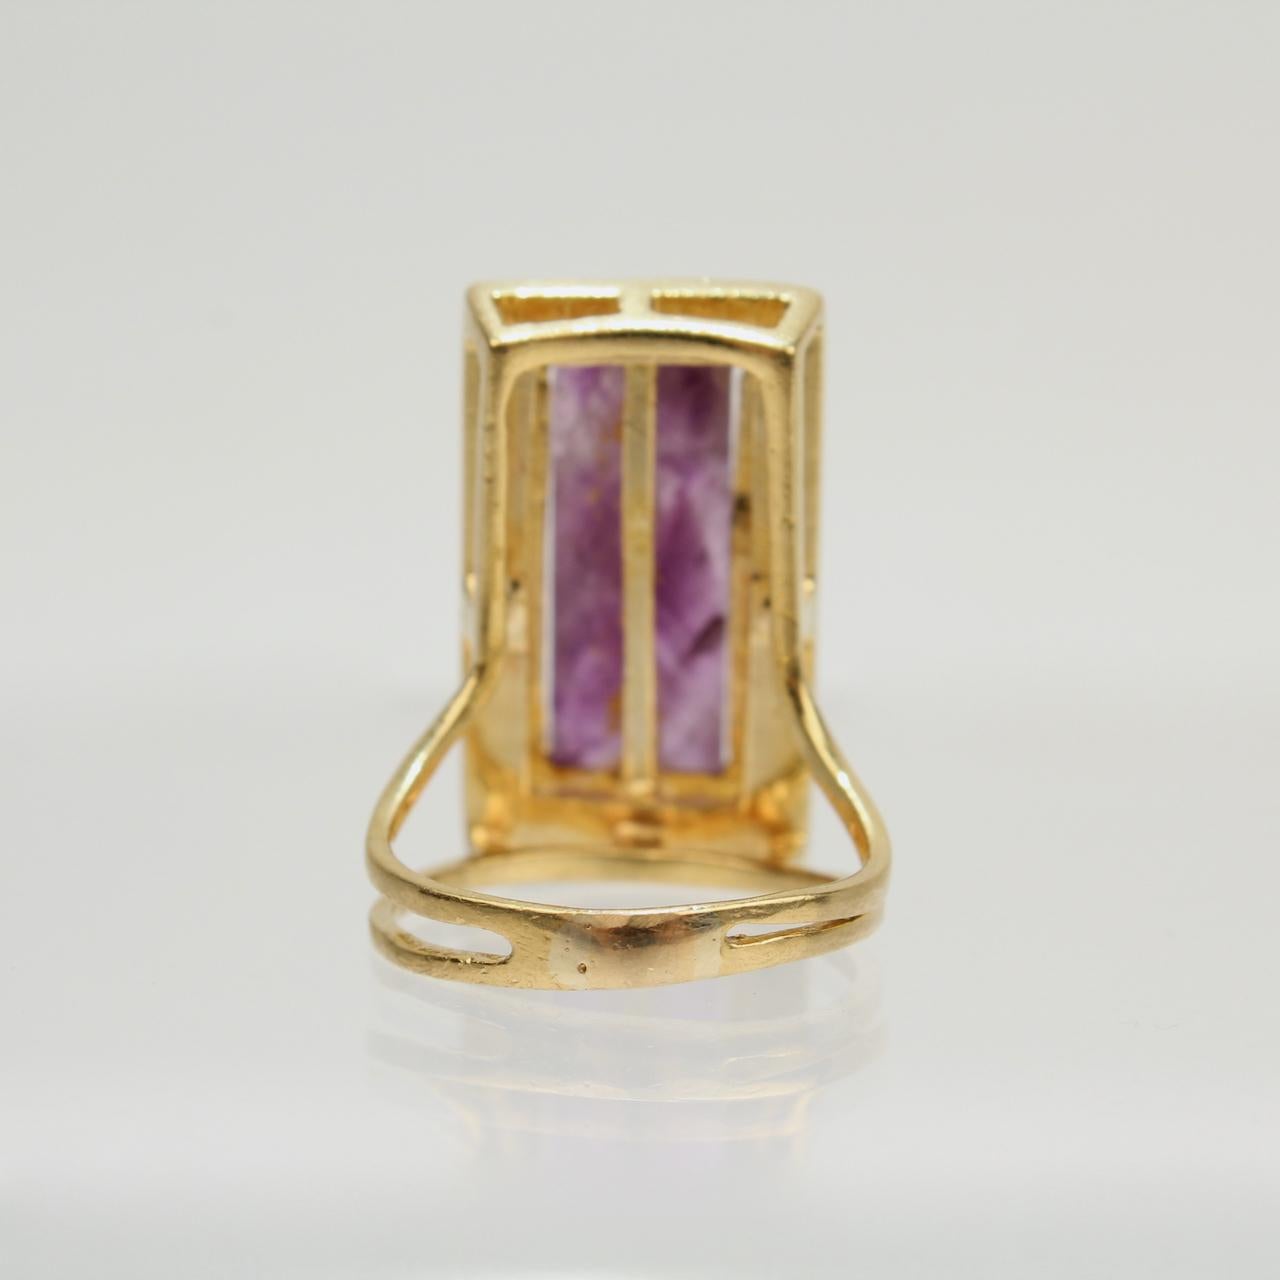 Women's Modernist Asymmetrical 18k Gold and Rough Cut Amethyst Gemstone Cocktail Ring For Sale